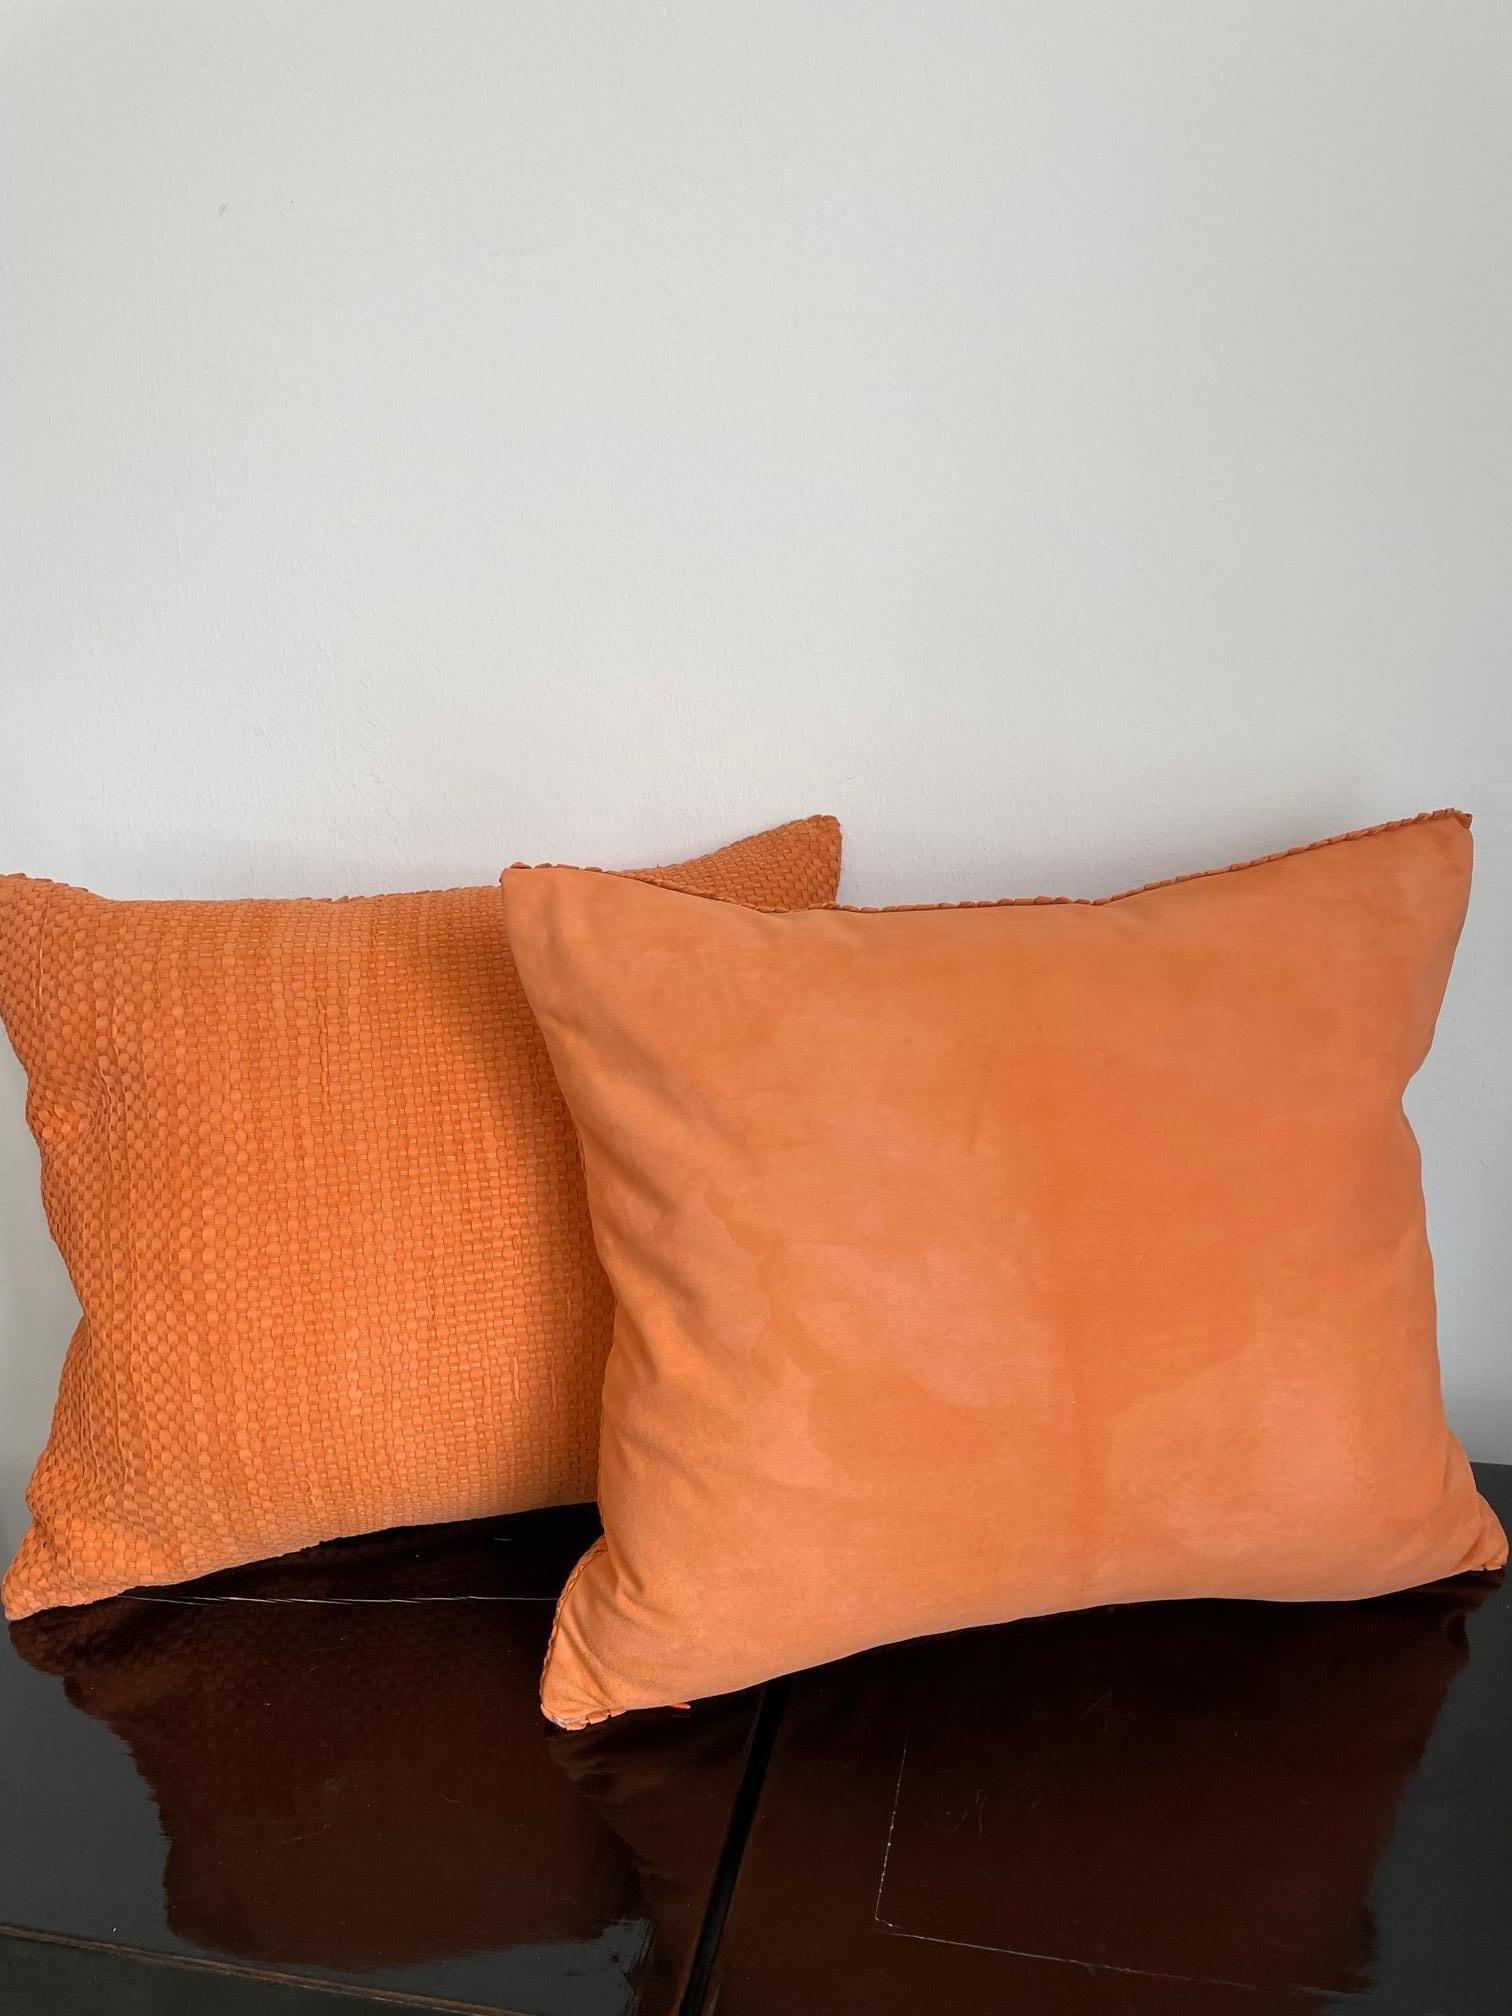 German Pair Hand Woven Suede Cushions Colour Mandarine Square Shaped For Sale